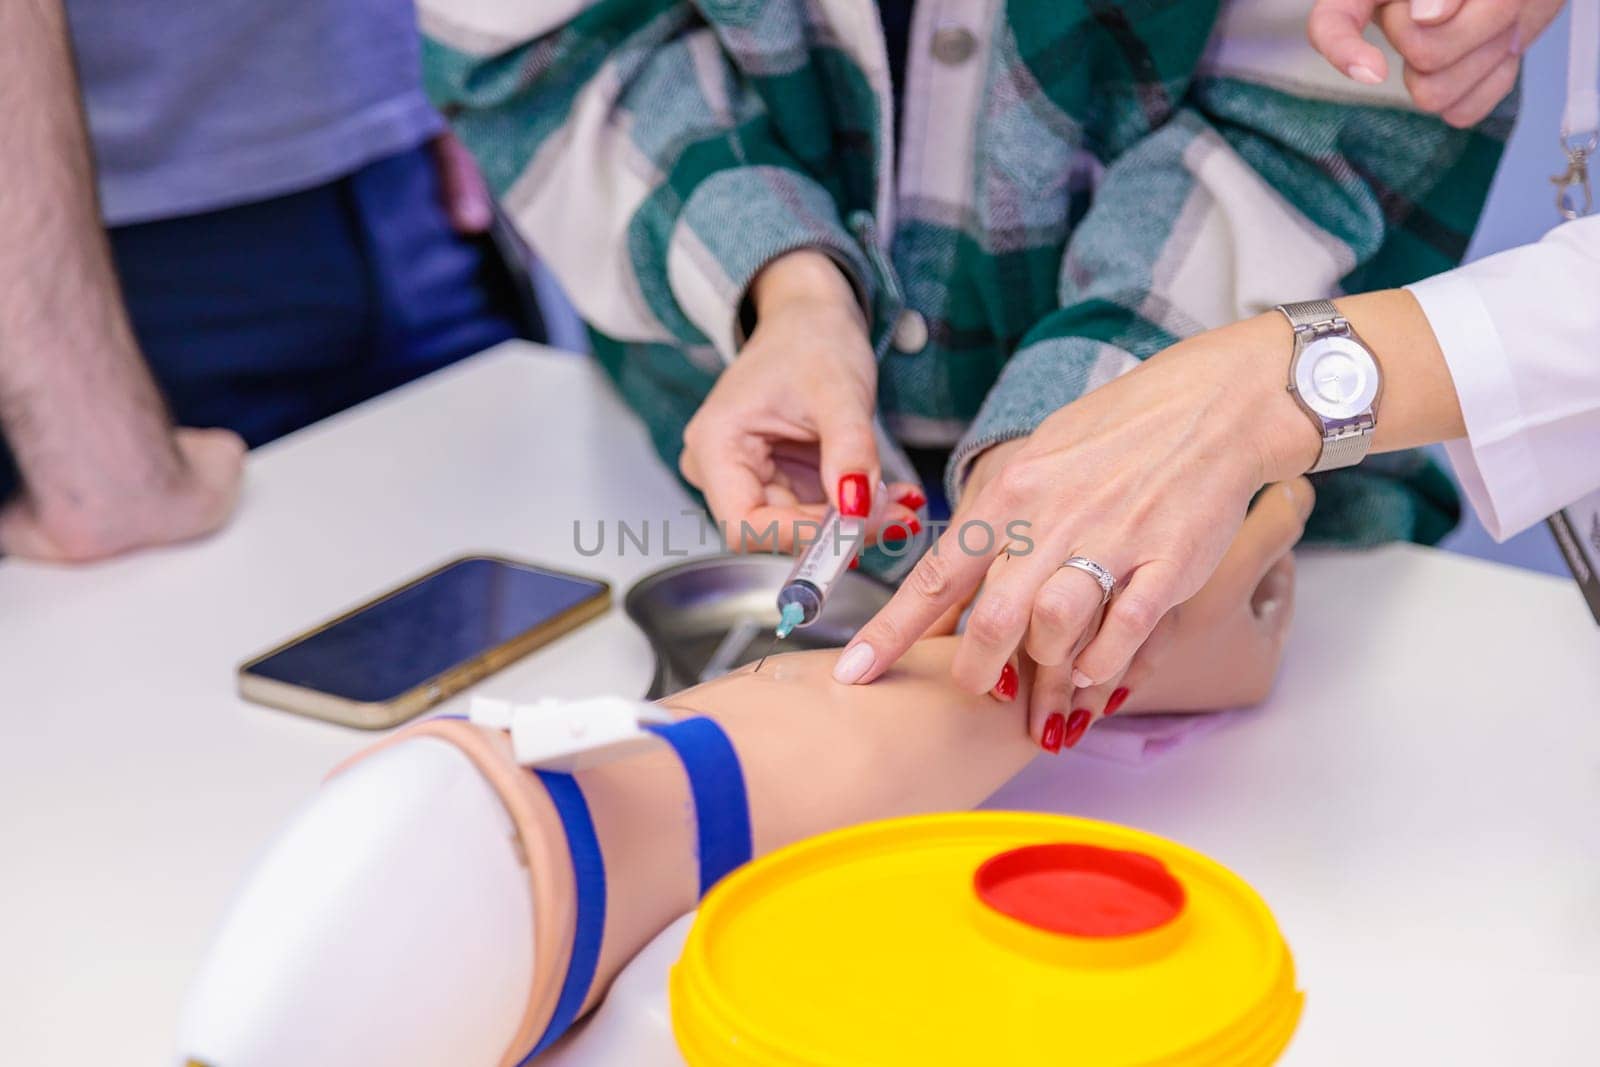 Training of blood sampling from a vein, on a model of a human hand. by Yurich32